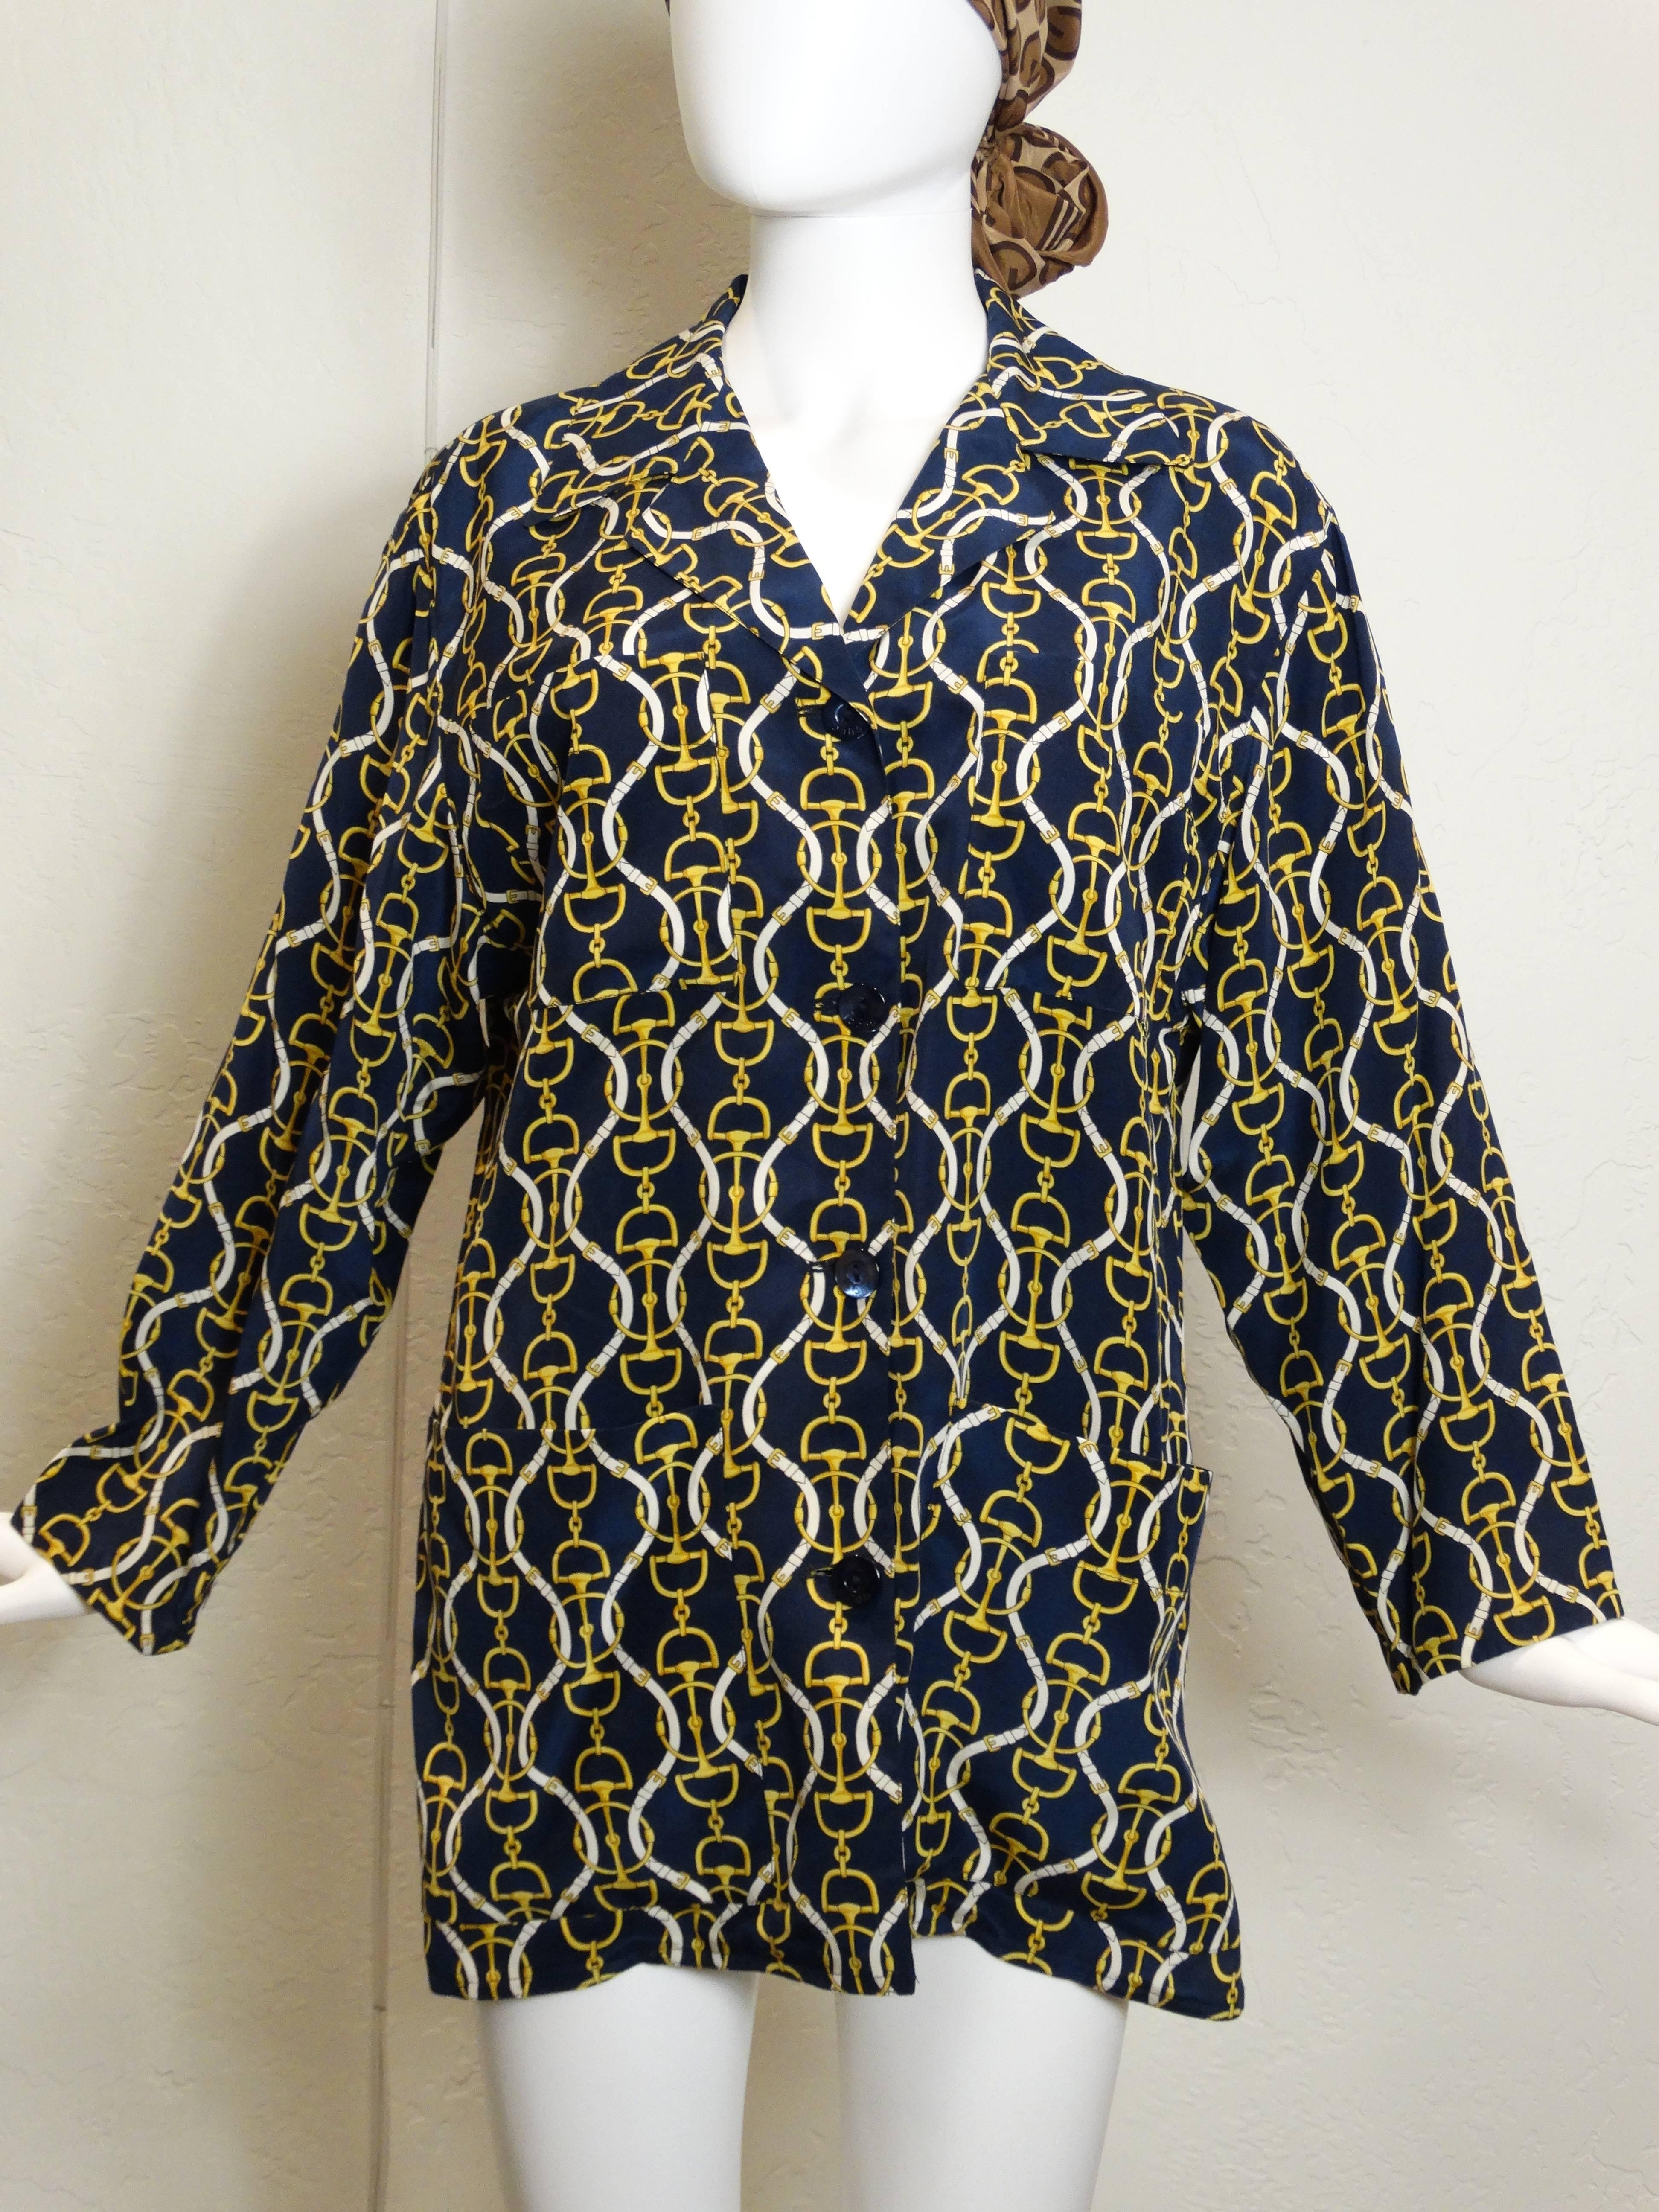 A fabulous silk 1980's Gucci jacket with the iconic horse bit print. The cut is a little boxy, but that was the 80's! This jacket has a top right pocket and two front bottom pockets. 4 large mother of pearl shell buttons with the iconic Gucci logo,